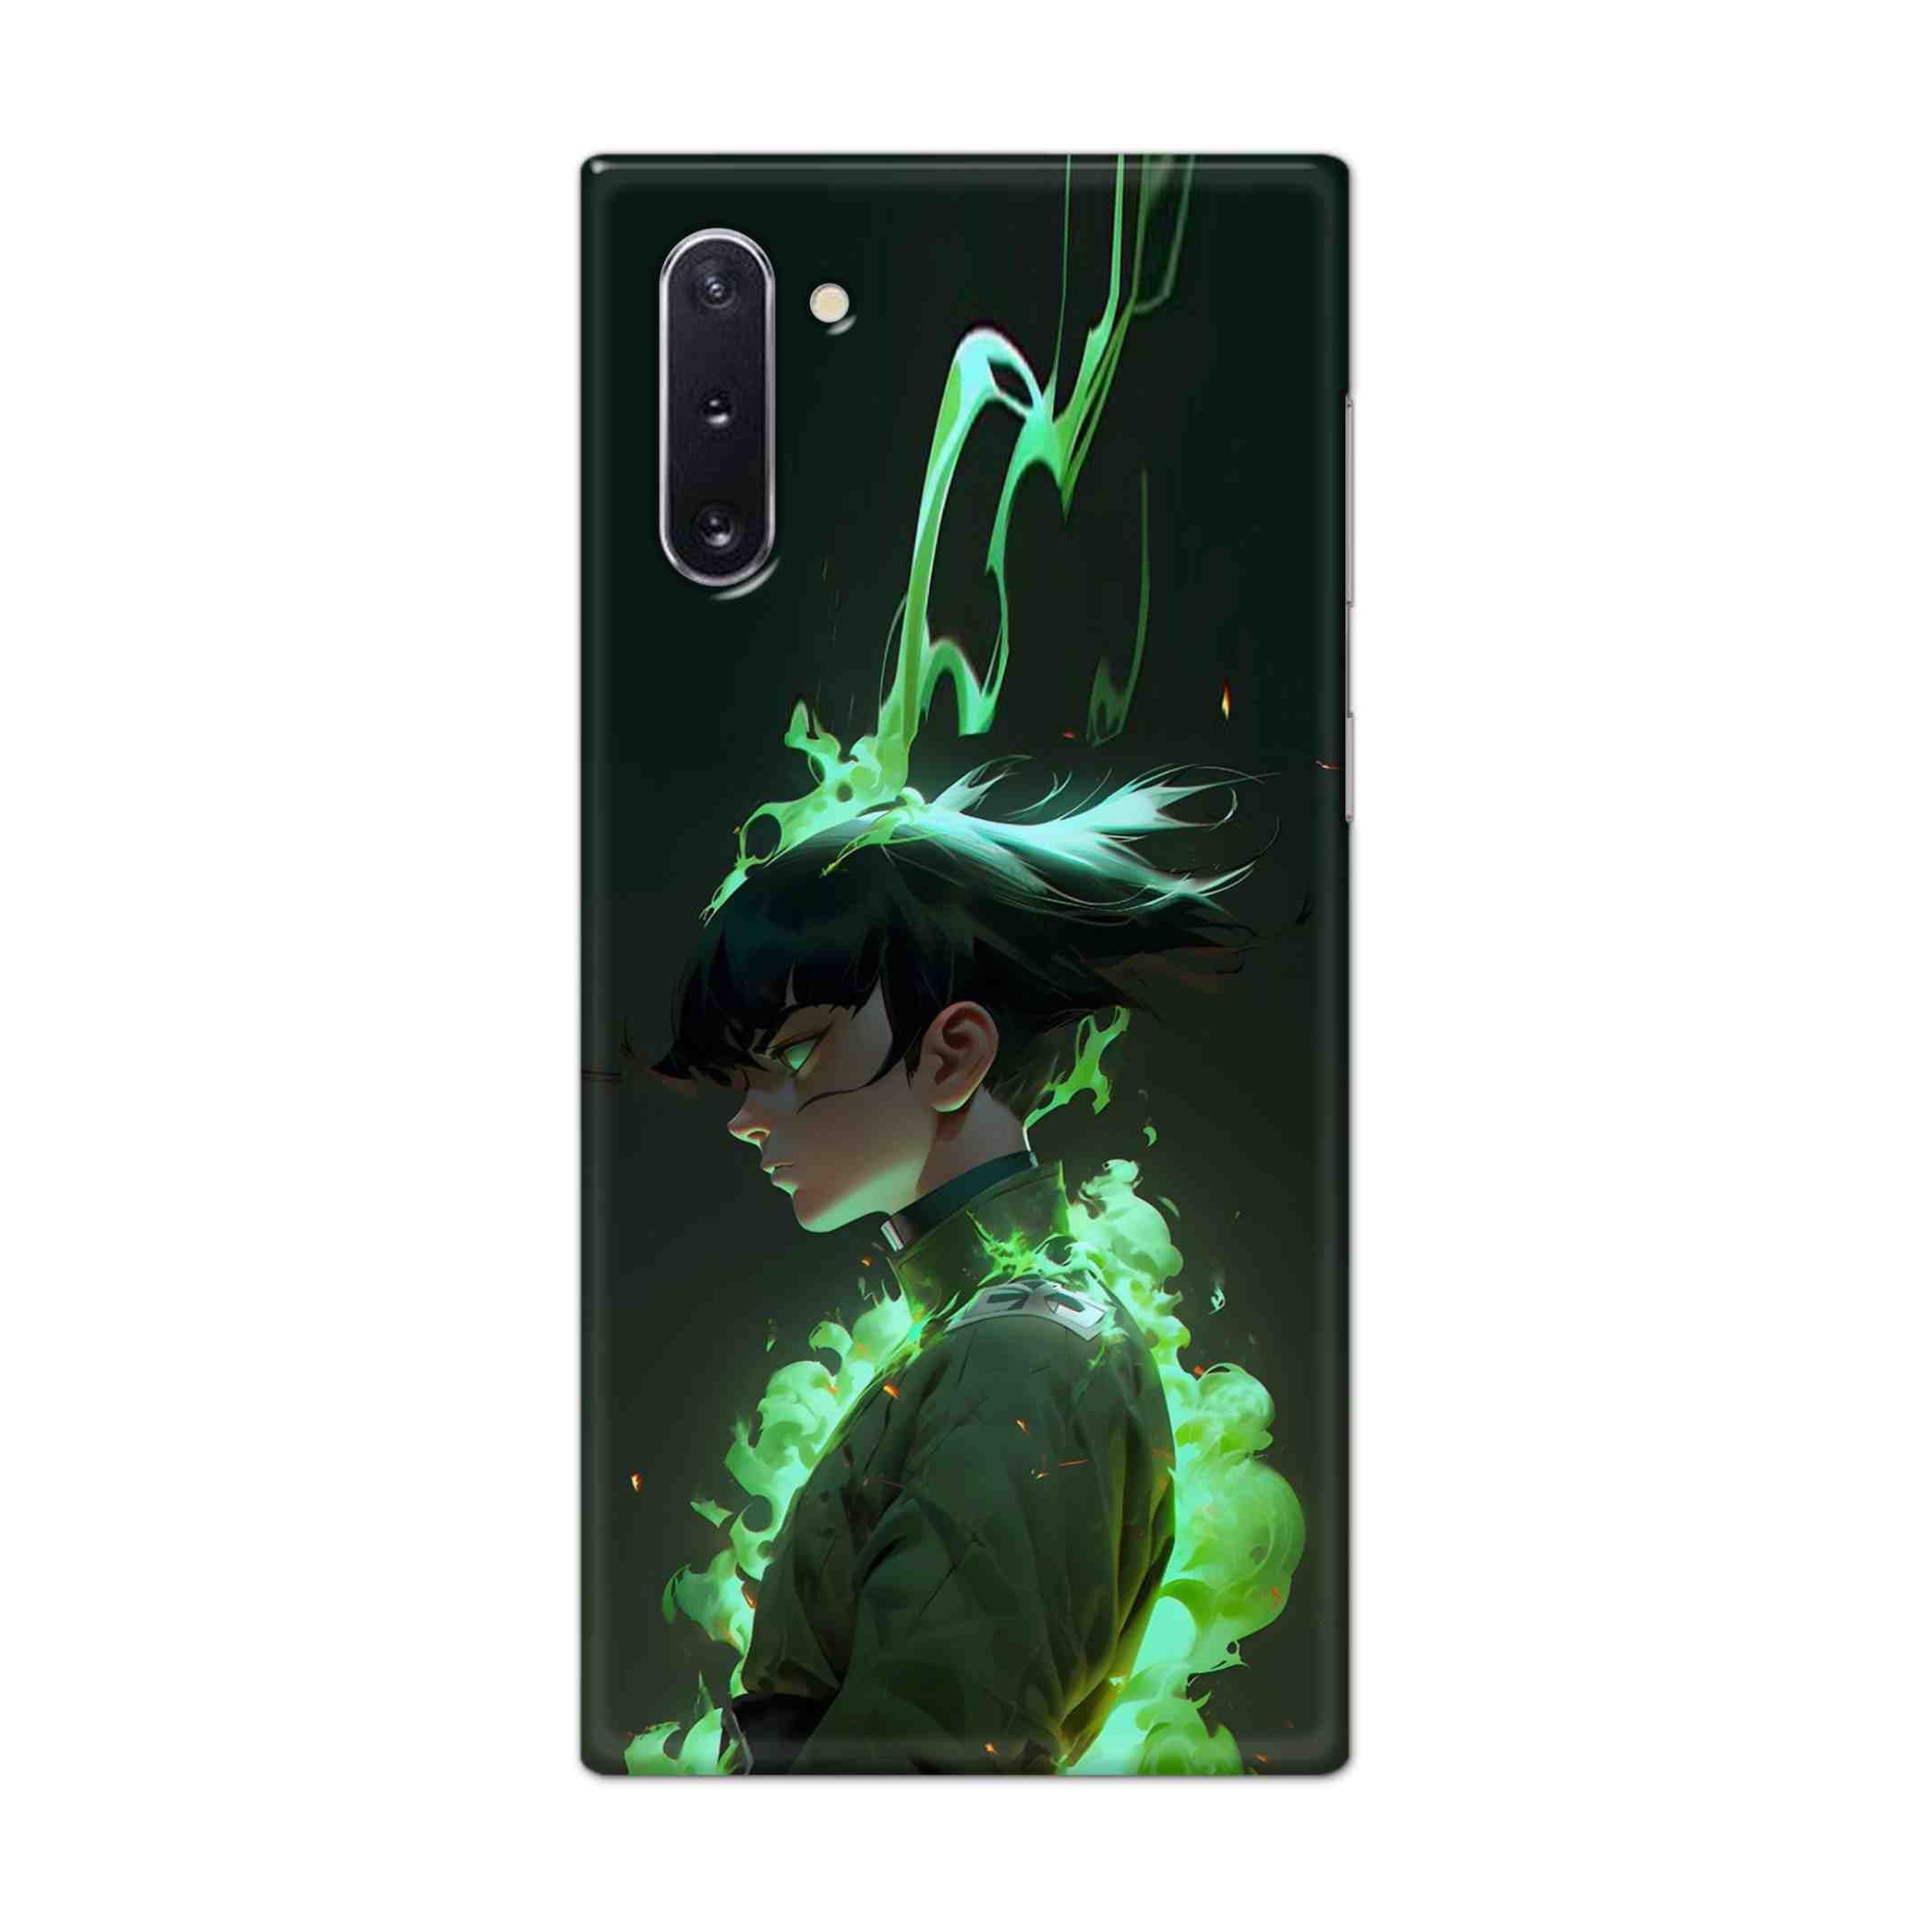 Buy Akira Hard Back Mobile Phone Case Cover For Samsung Galaxy Note 10 Online